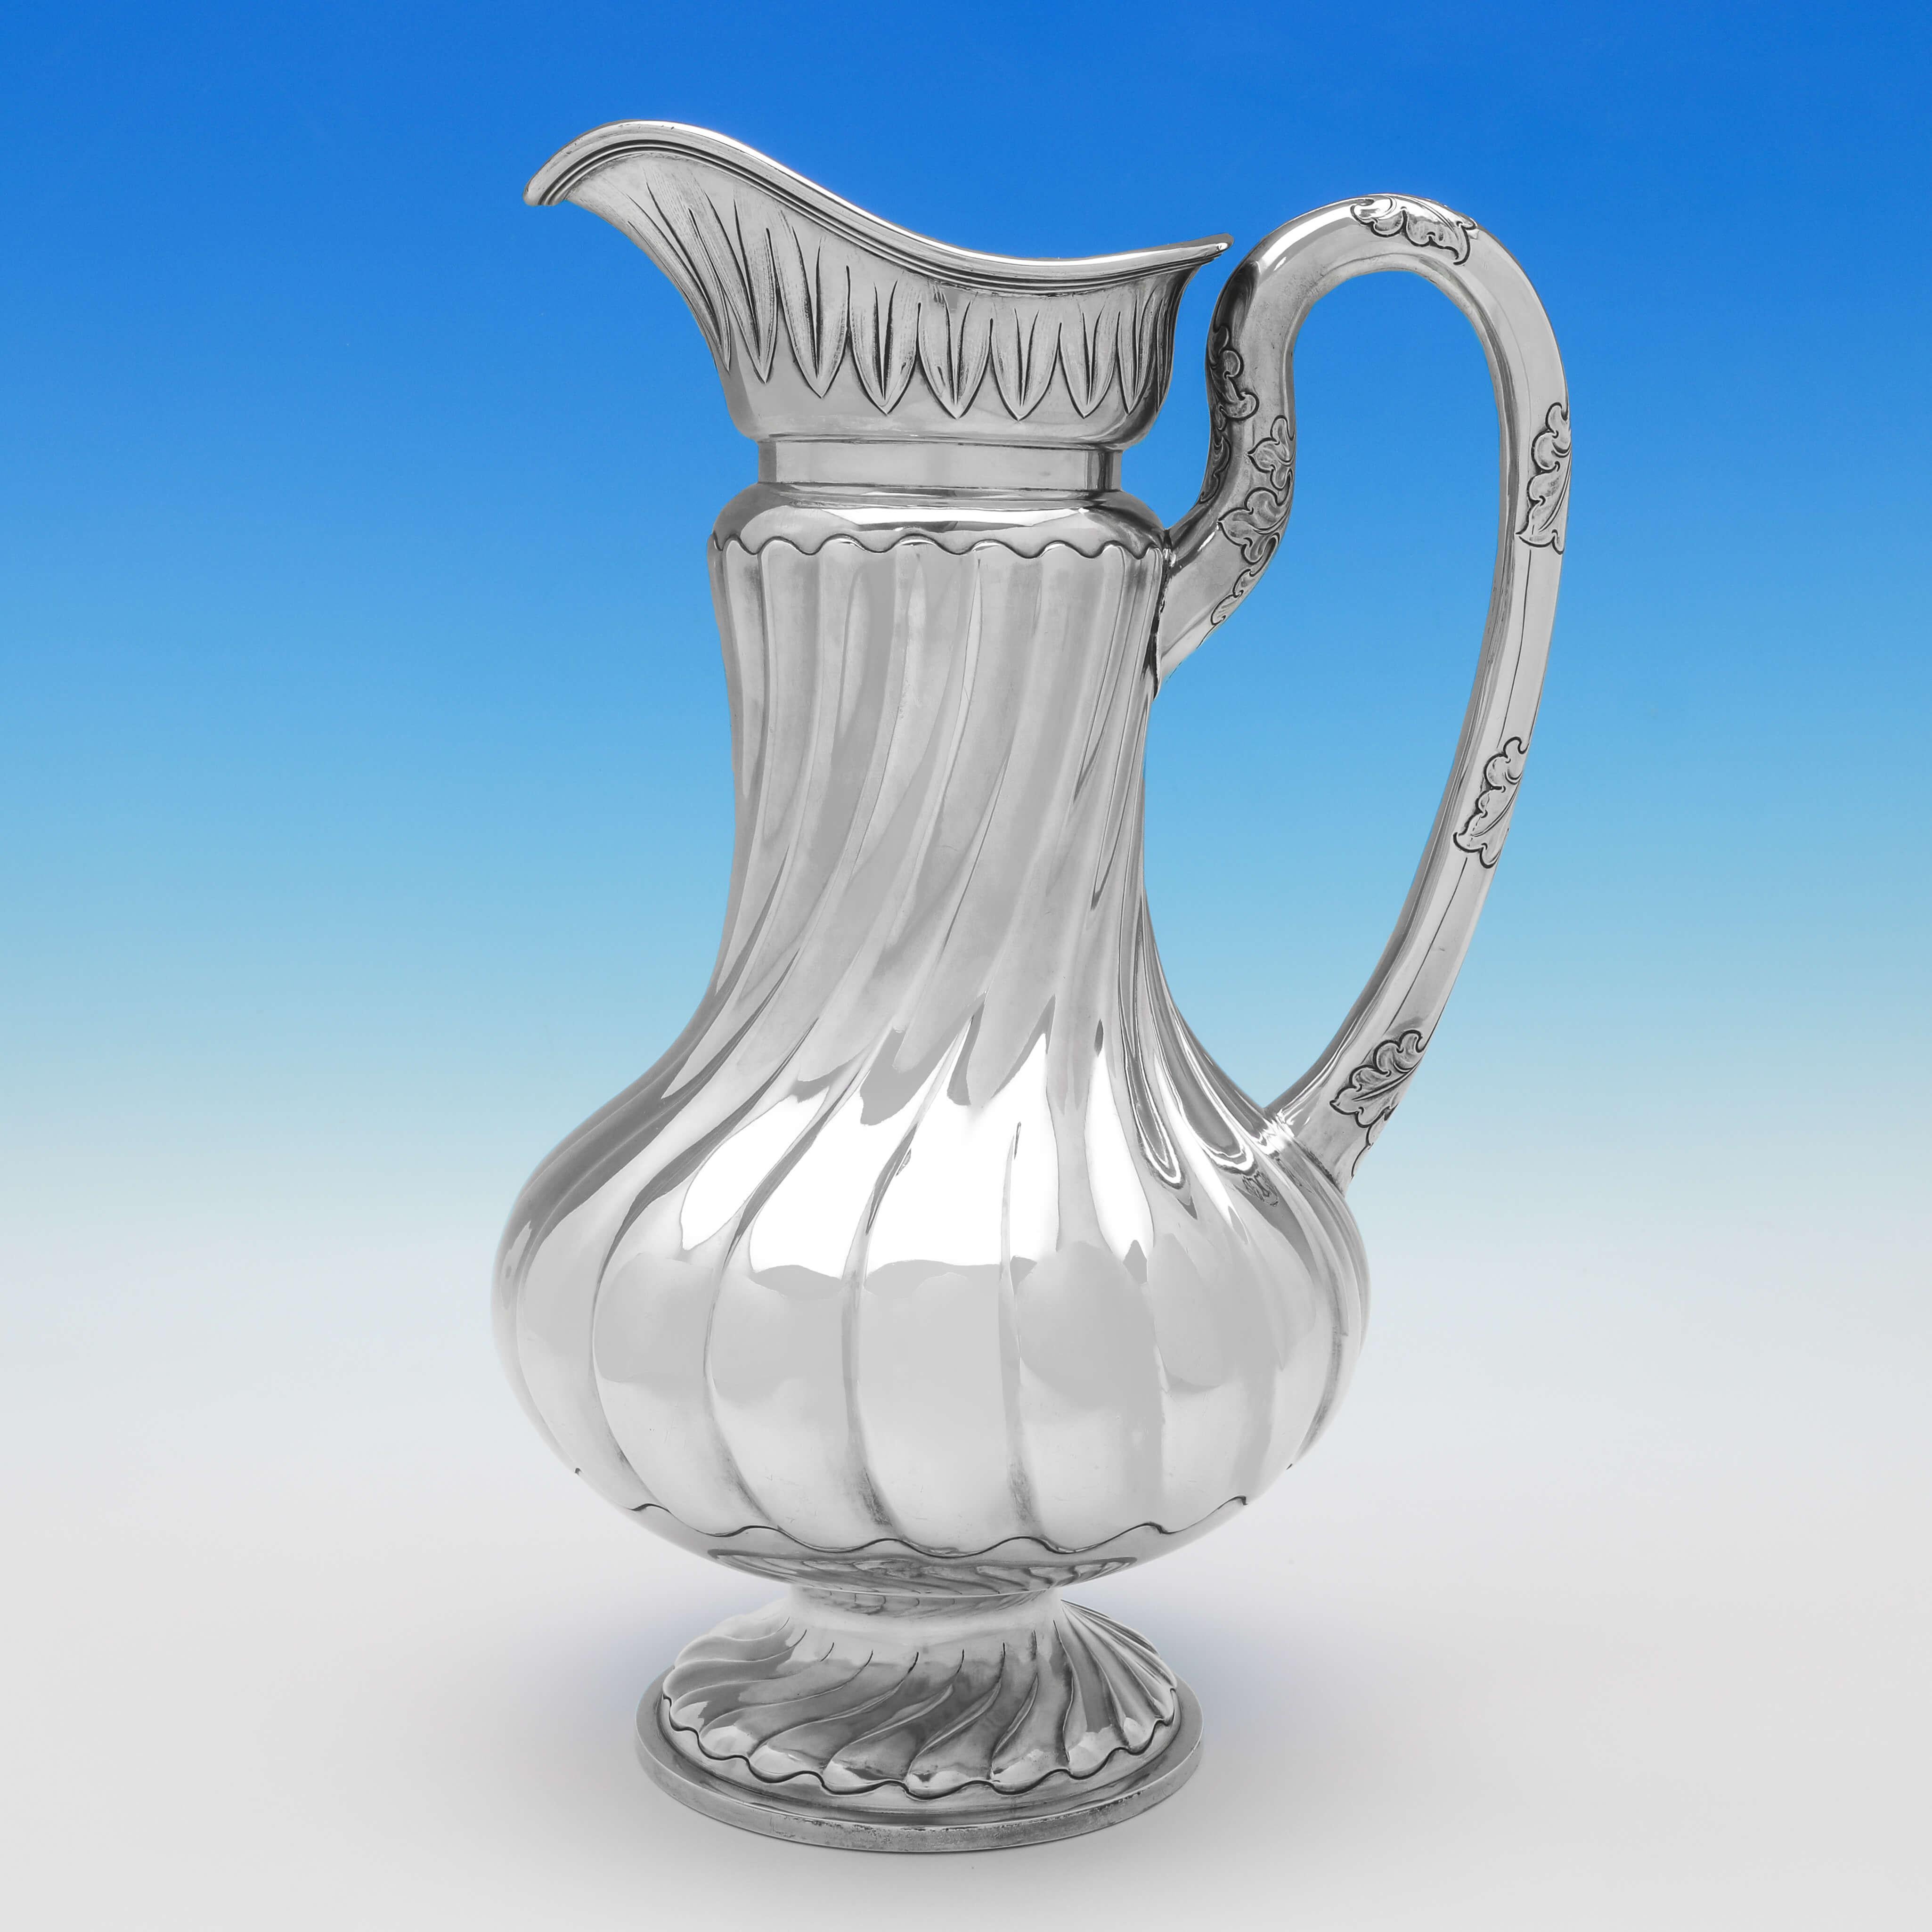 Hallmarked in London in 1891 by Joseph & Horace Savory (trading as the Goldsmiths Alliance) this rare, English, Antique Sterling Silver Ewer & Basin, features sunken and swirled fluting, and acanthus detailing to both pieces. 

The ewer measures